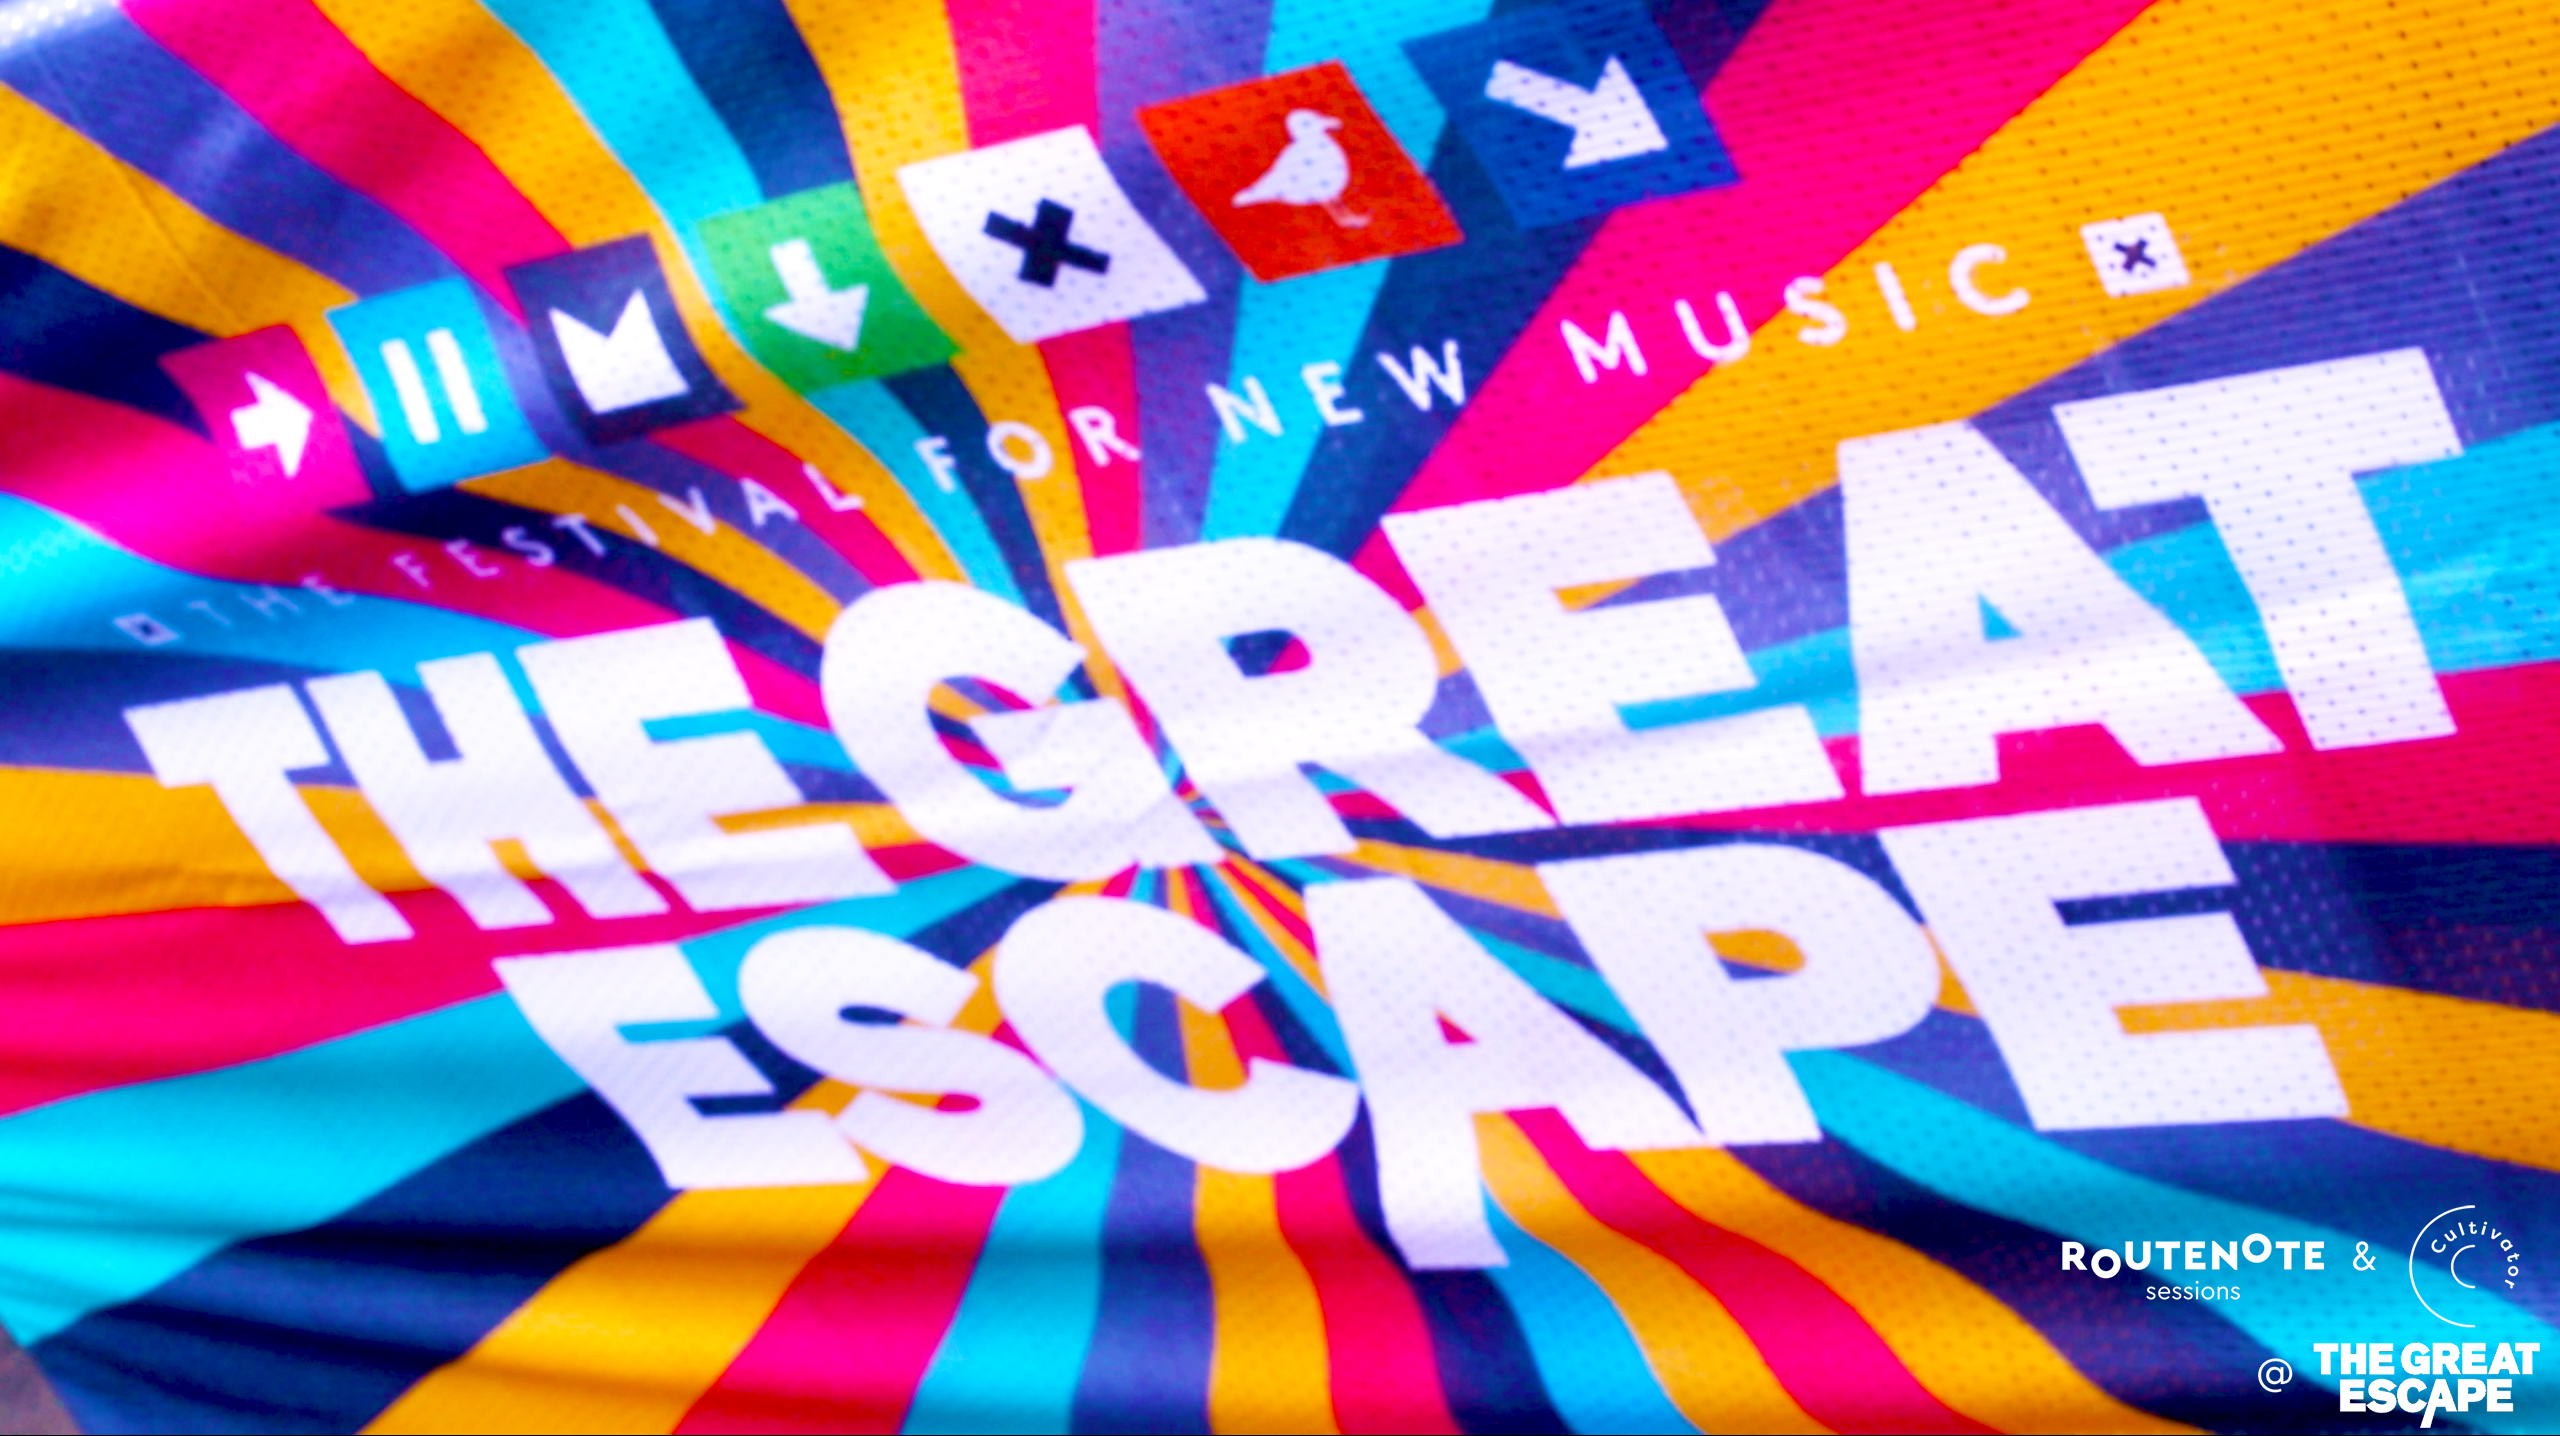 The Great Escape lit up Brighton for a weekend of amazing music diversity